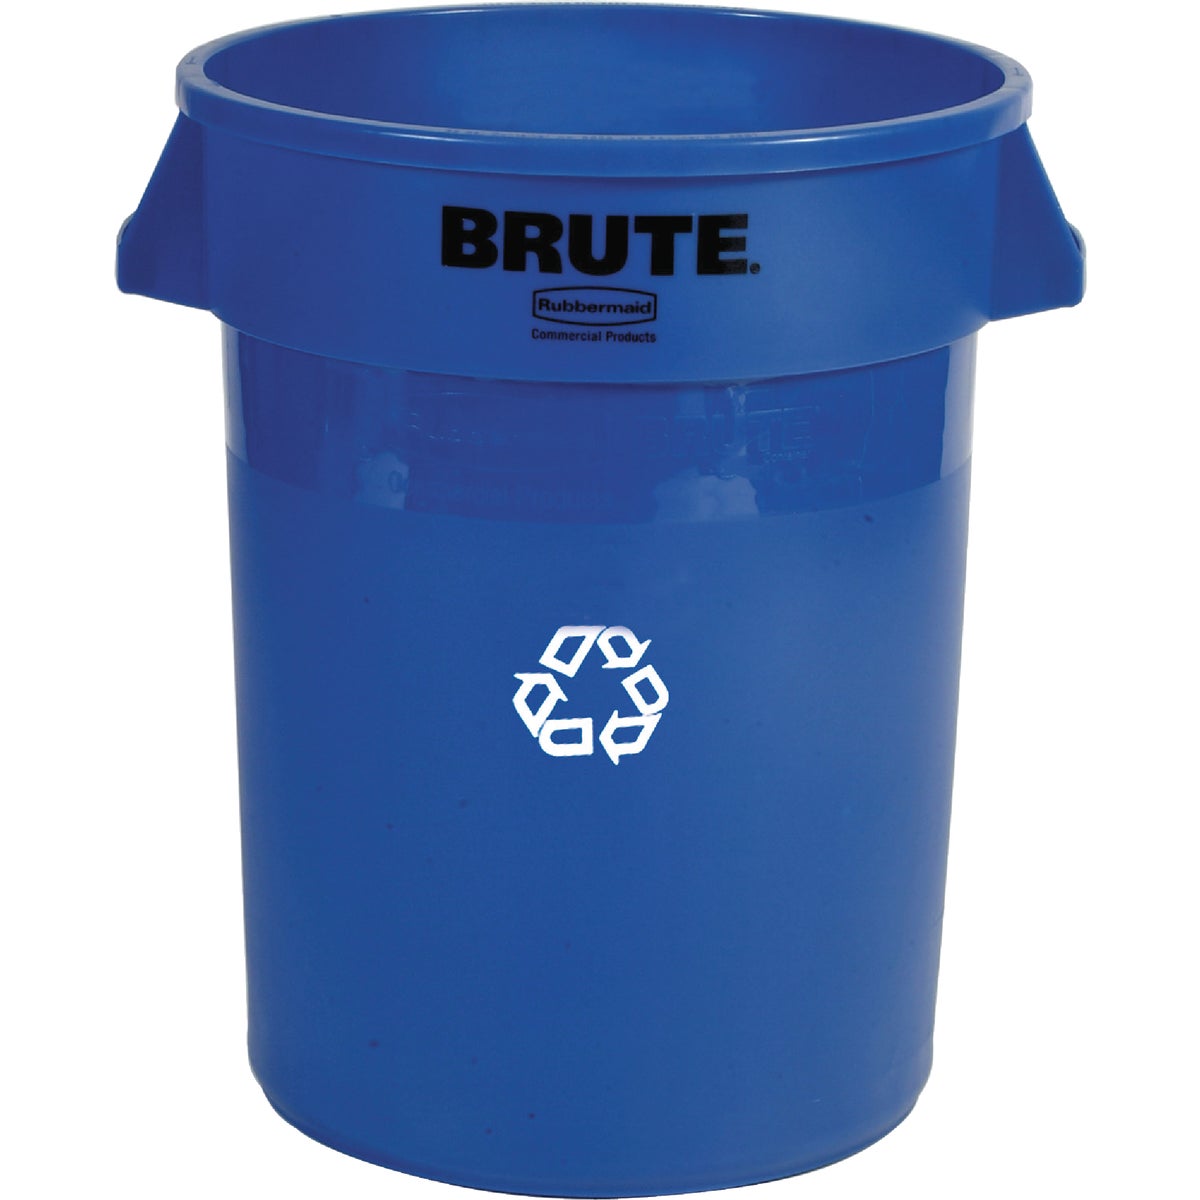 Item 600183, Brute container contains PCR (Post Consumer Recycled Resin) exceeding EPA 